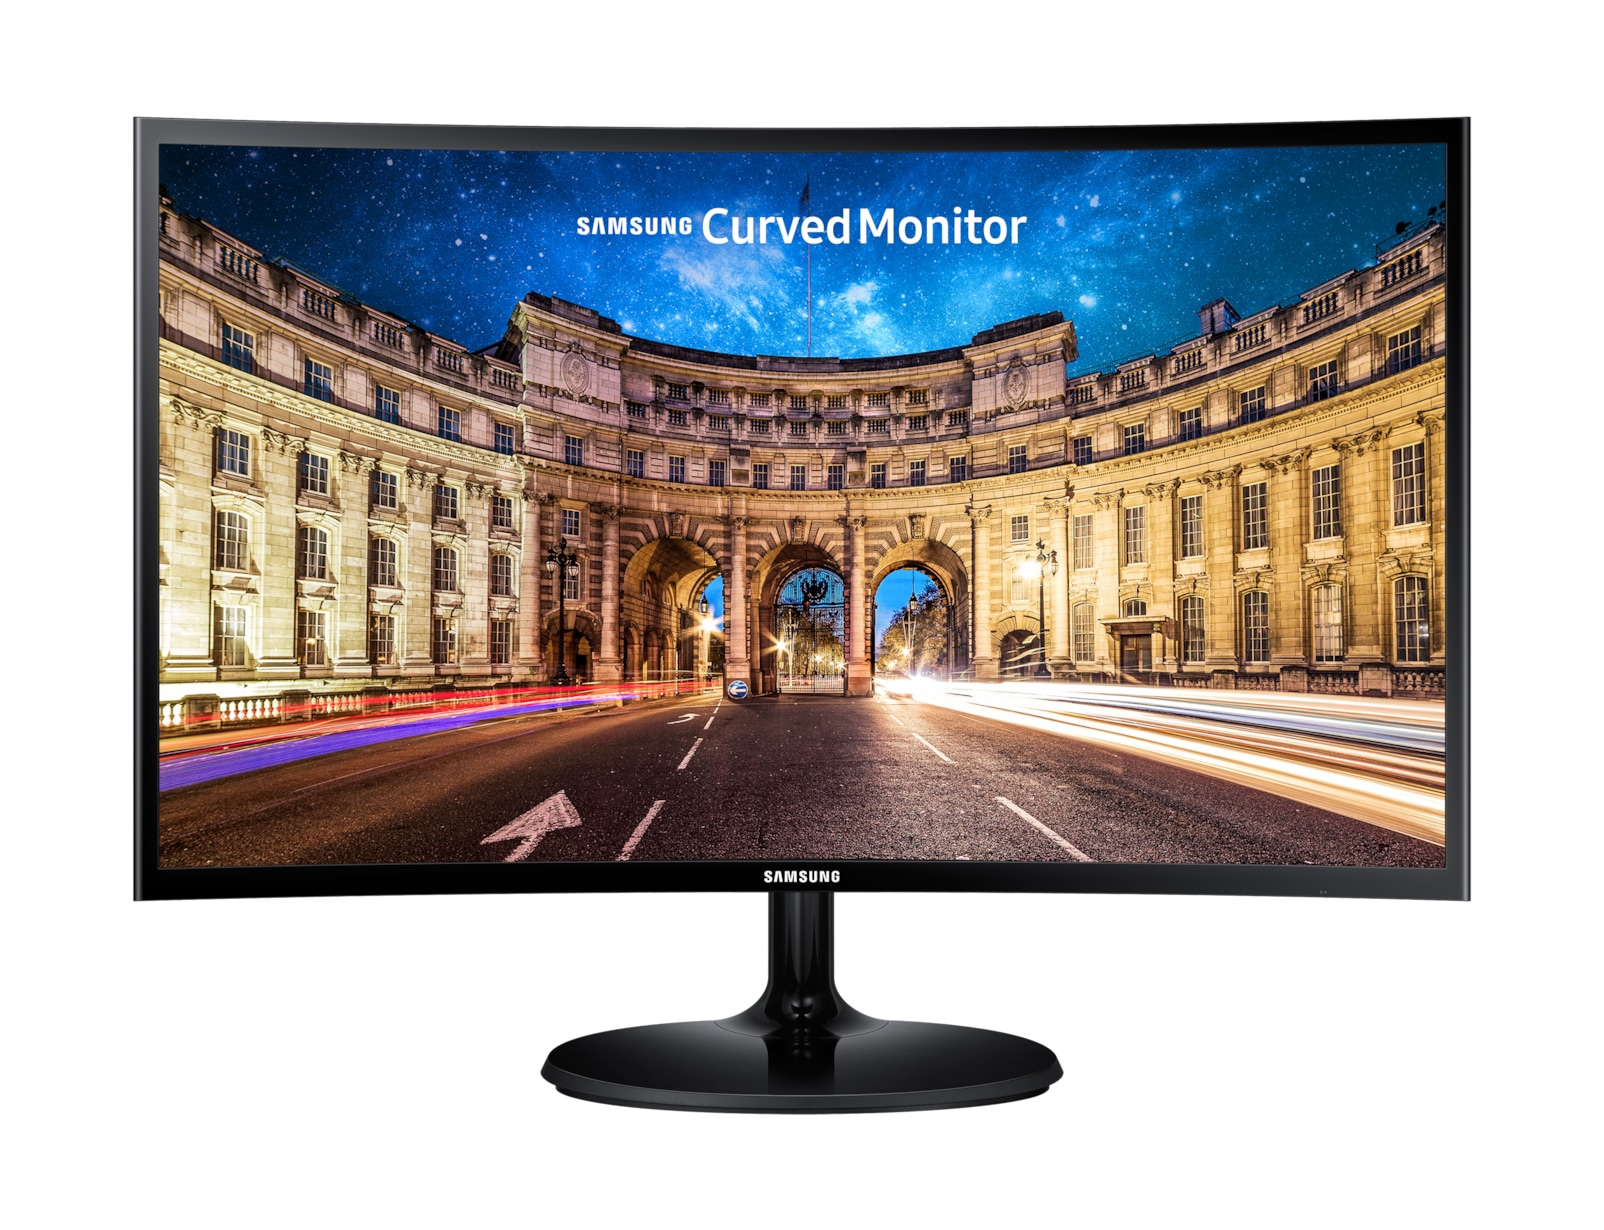 uk-curved-cf390-lc24f390fhuxen-001-front-black (1)